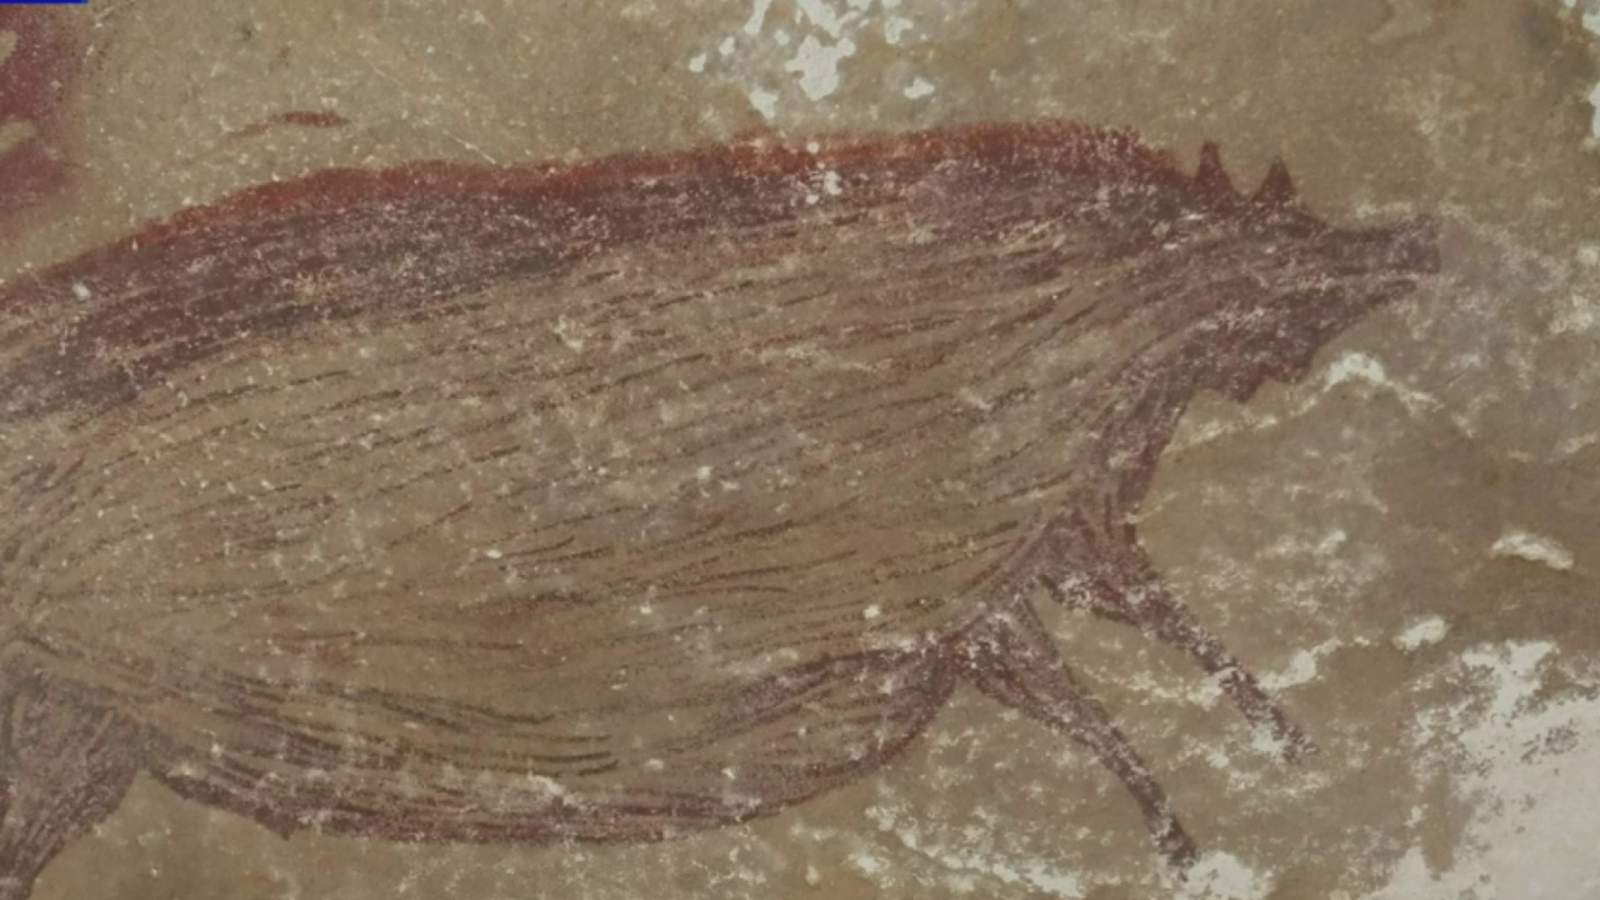 45,000-year-old cave painting of pig may be oldest known animal art in world